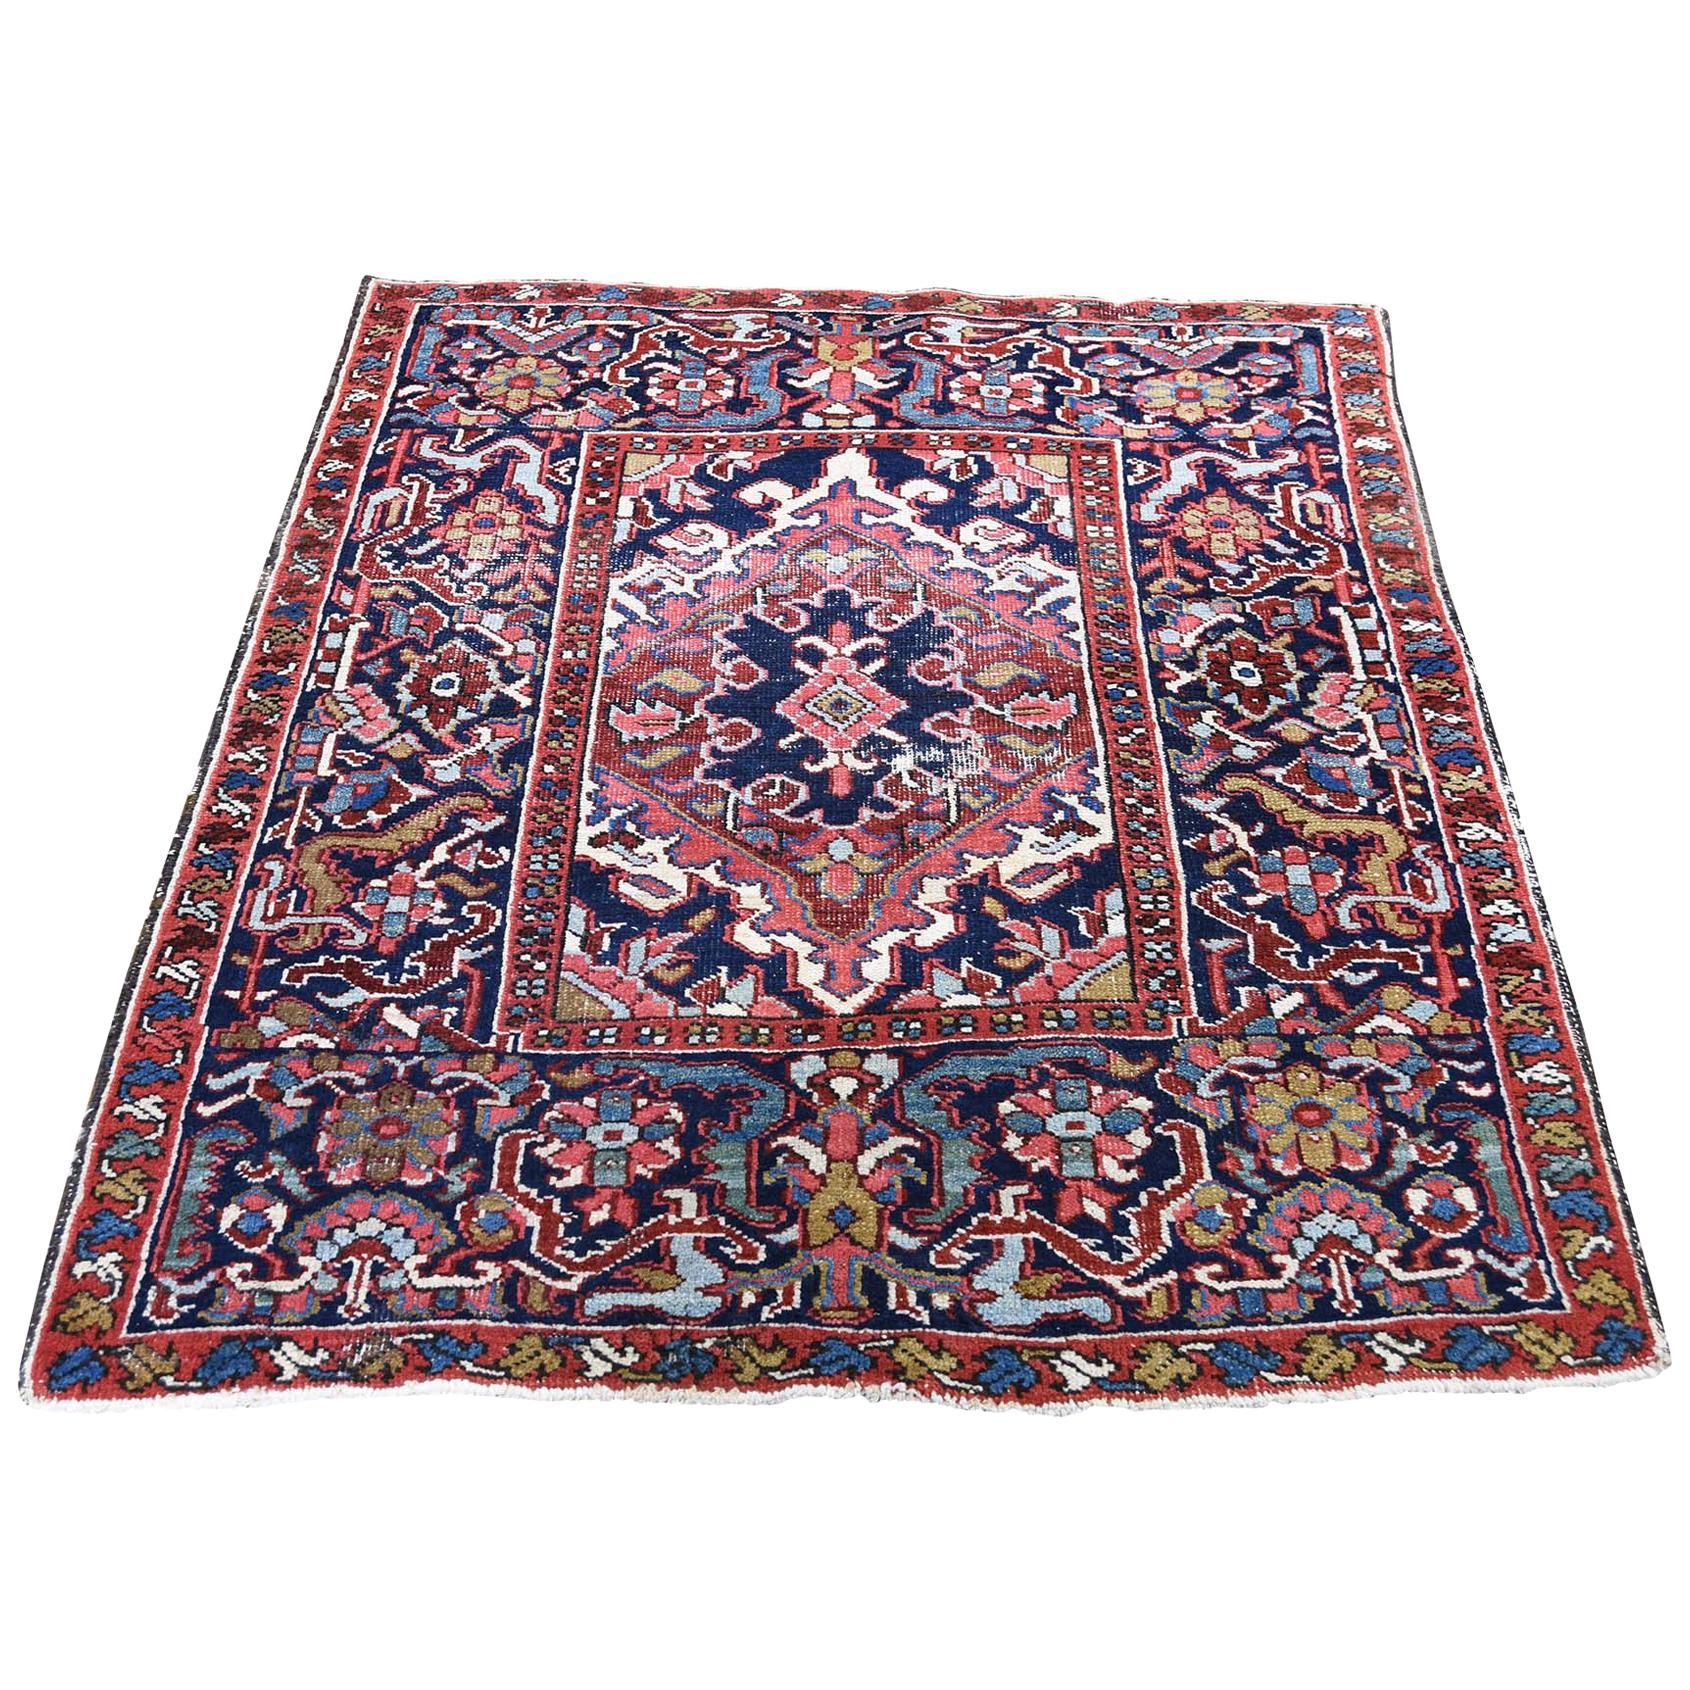 1900s Antique Persian Heriz Hand-Knotted Oriental Rug- 3′6″ × 4′4″